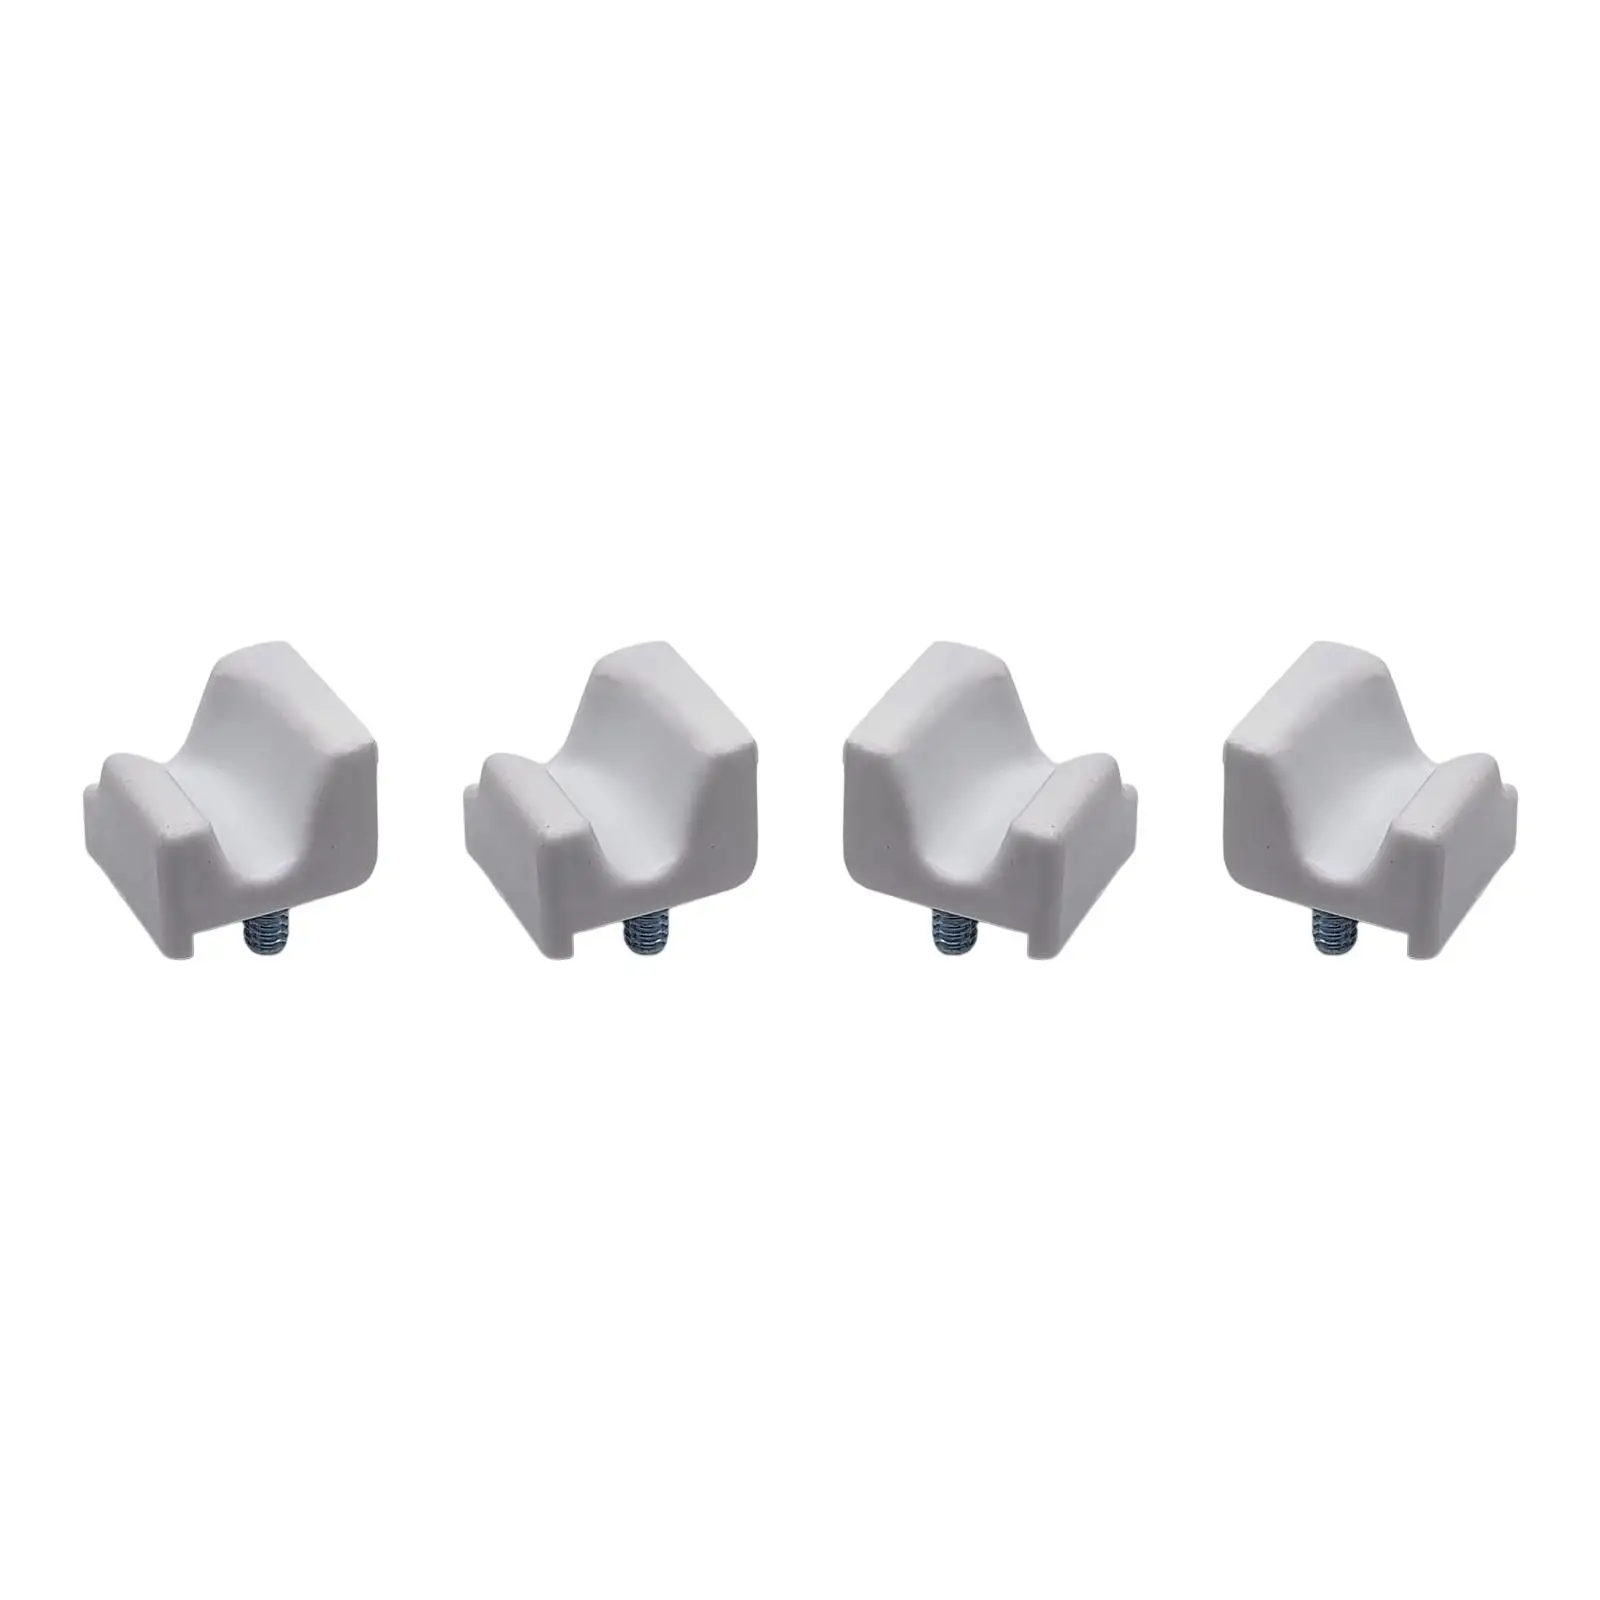 4x Freezer Basket Retainers #7009399 2 Left 2 Right for 611 611G Accessories Replacement Part